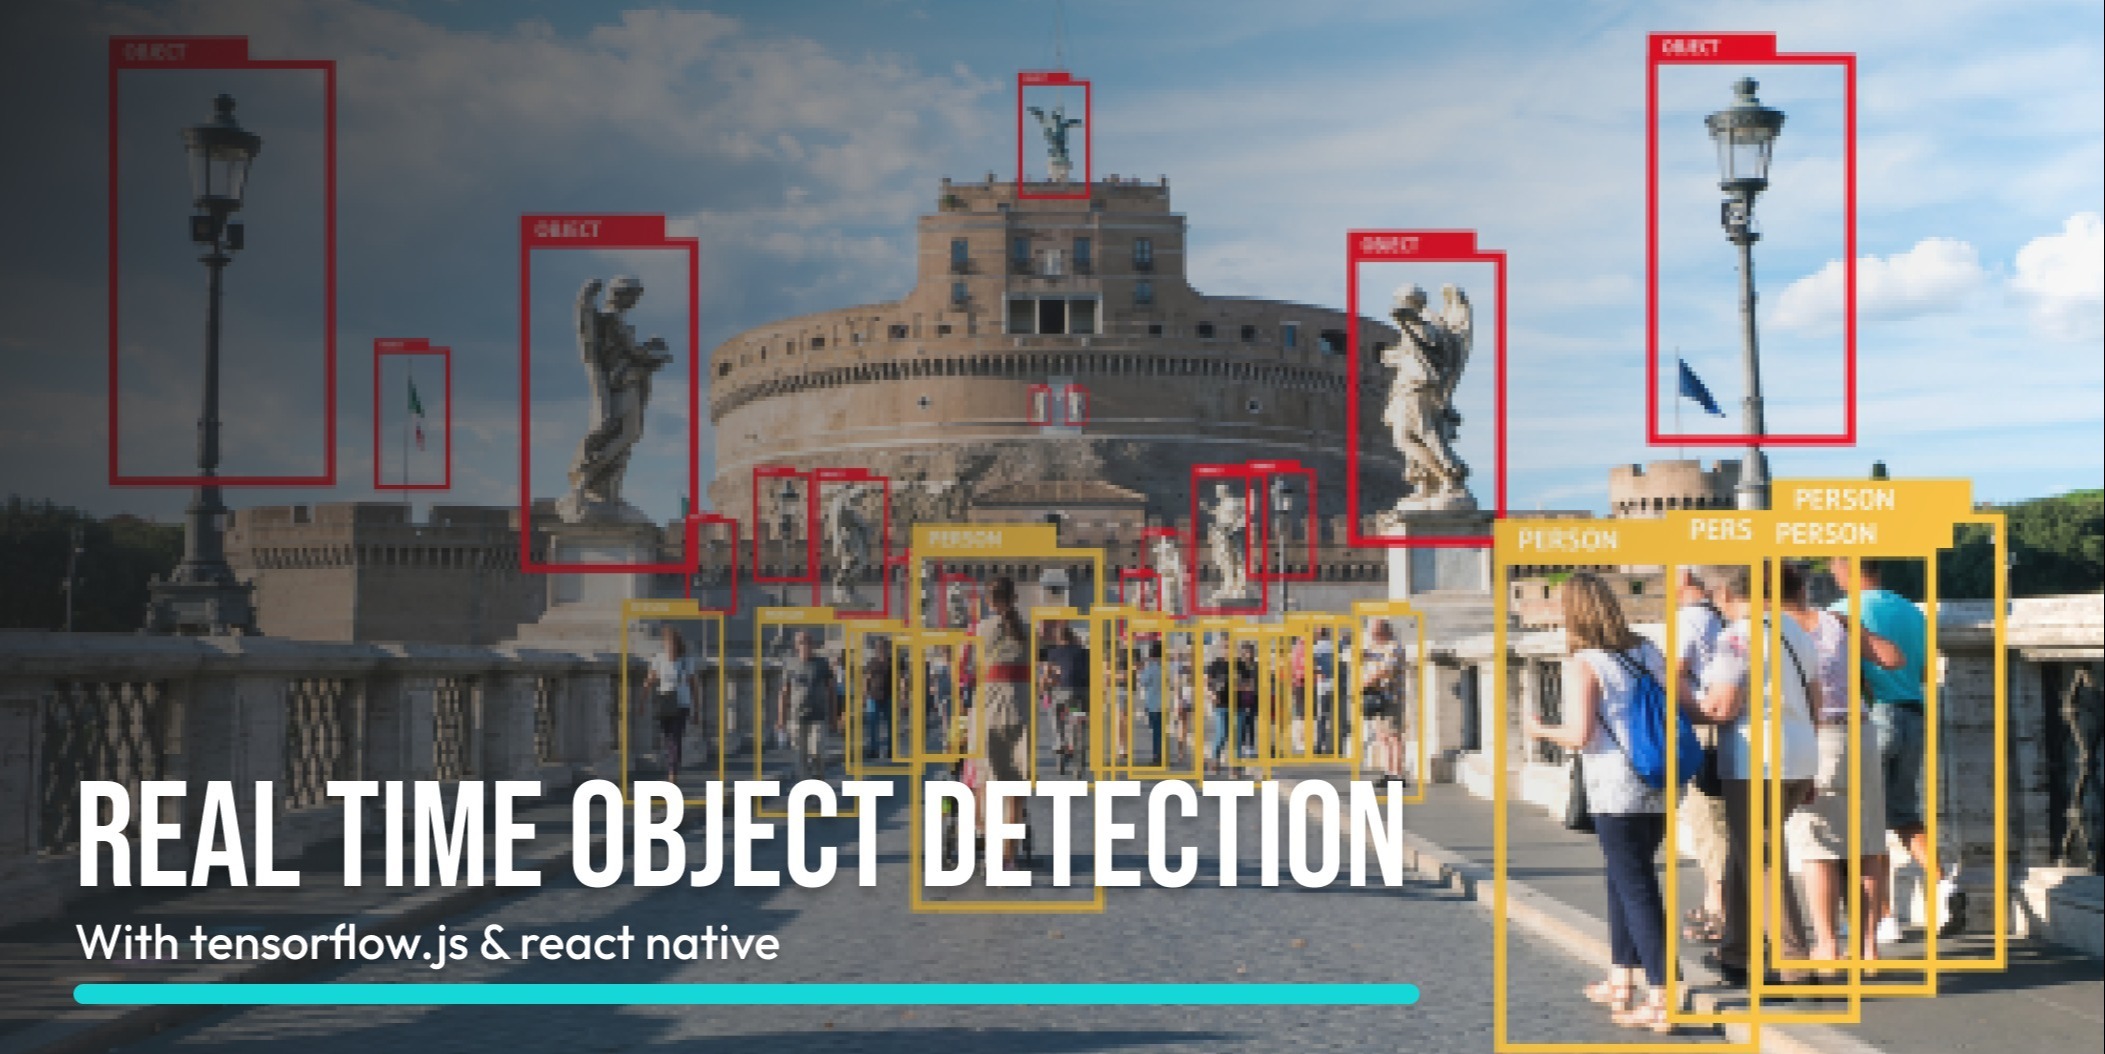 real-time object detection using TensorFlow in React Native, Real-Time object detection using TensorFlow, Real-Time object detection in react native, Real-Time object detection